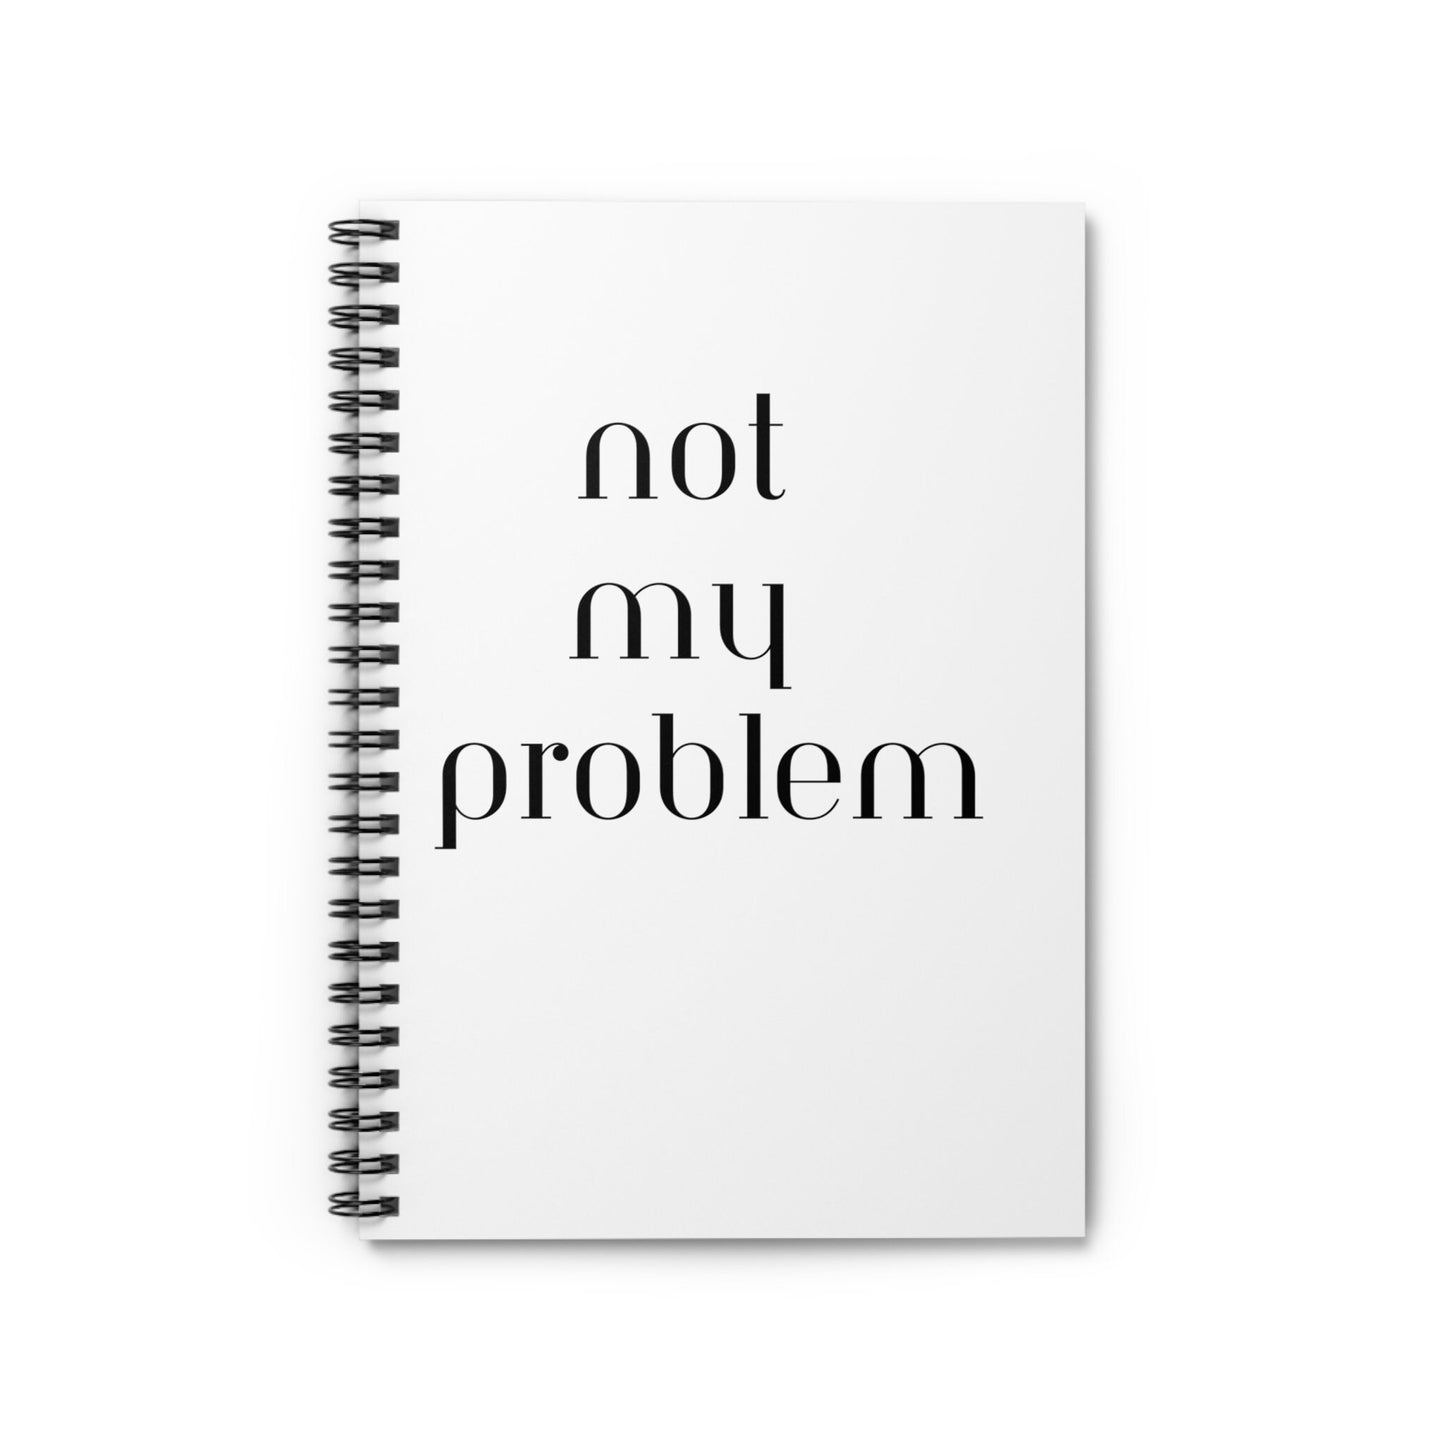 Not My Problem Spiral Writing Notebook - Ruled Line